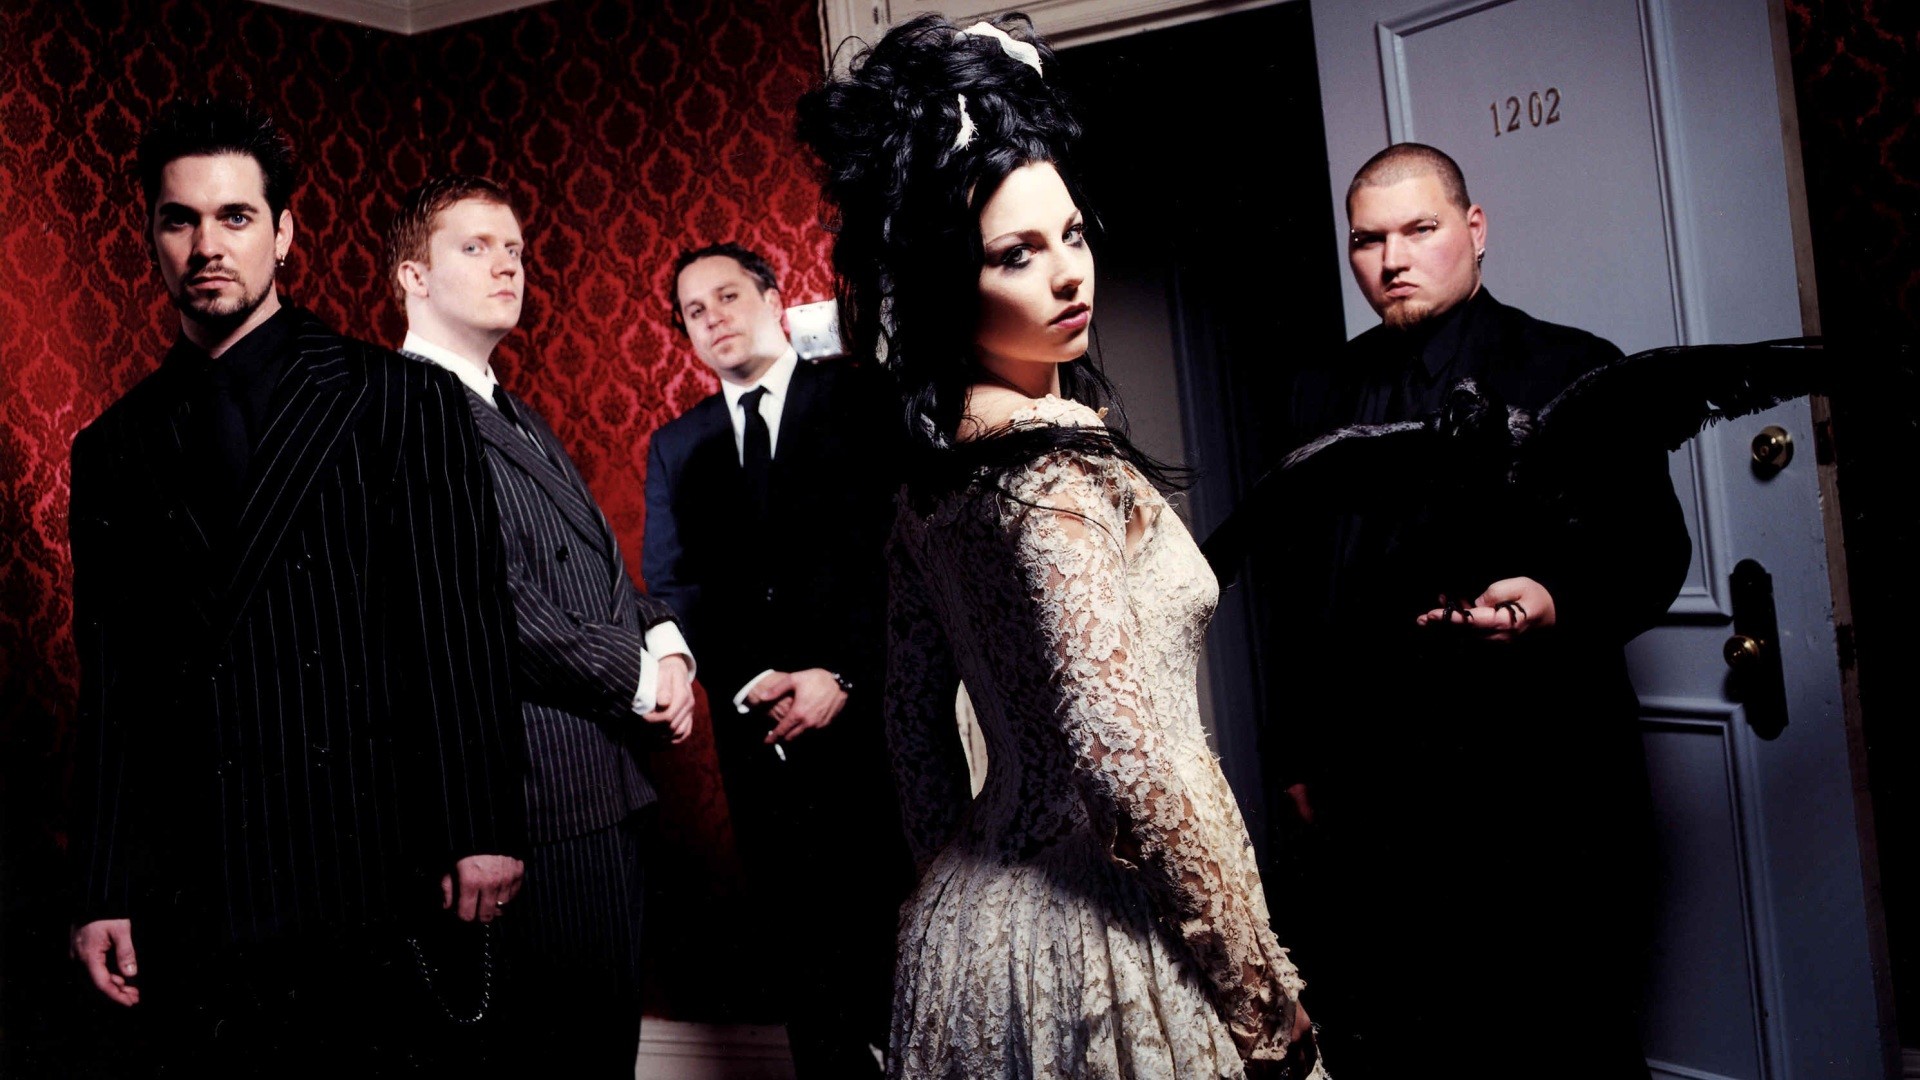 Evanescence Anywhere but Home Wallpaper 1920x1080